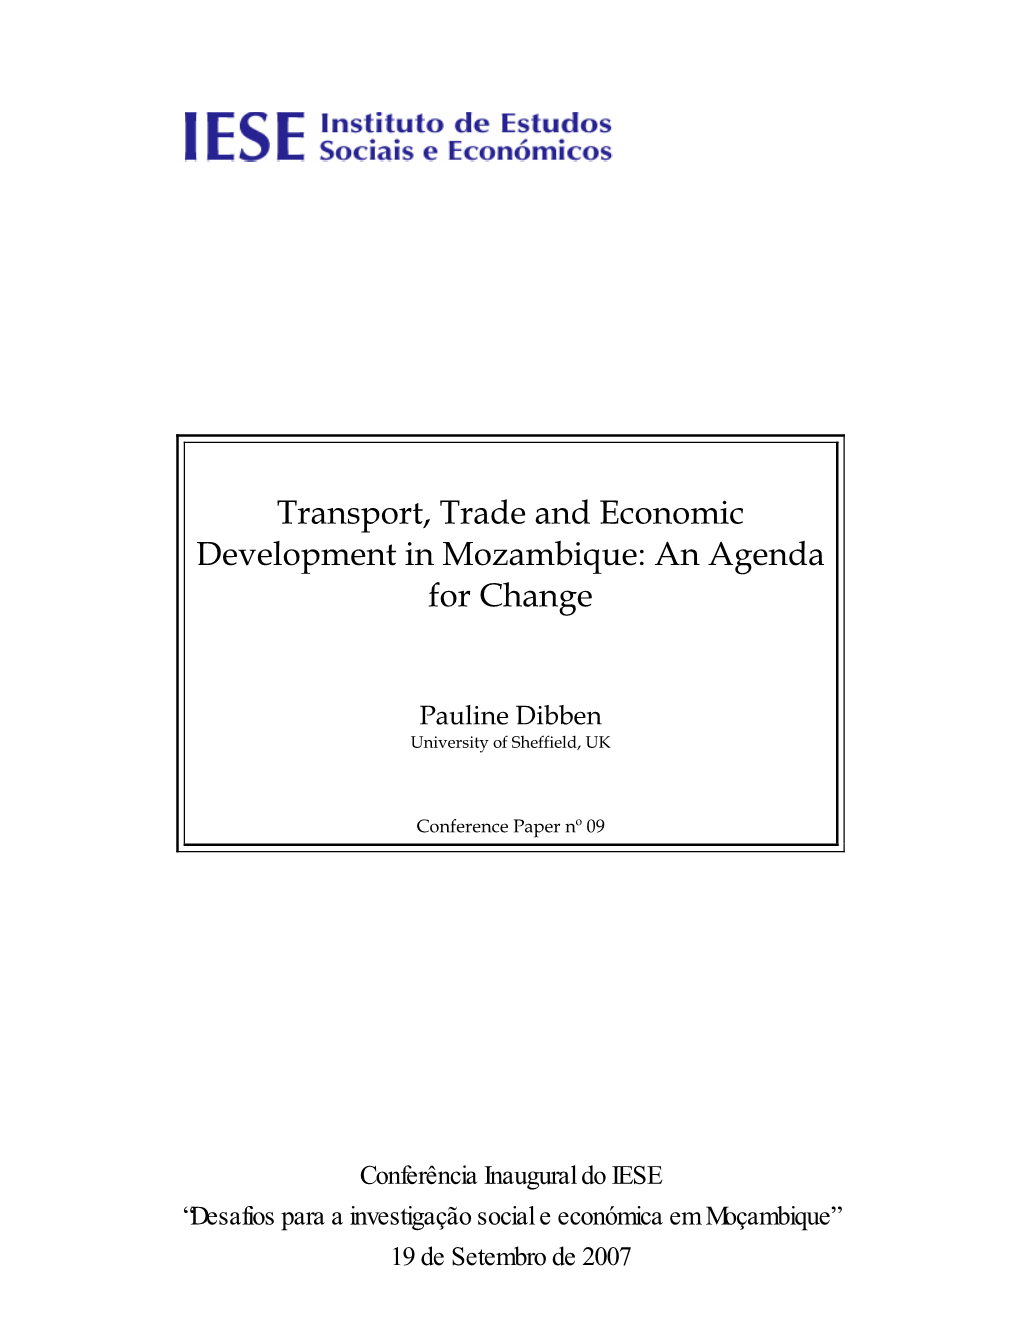 Transport, Trade and Economic Development in Mozambique: an Agenda for Change